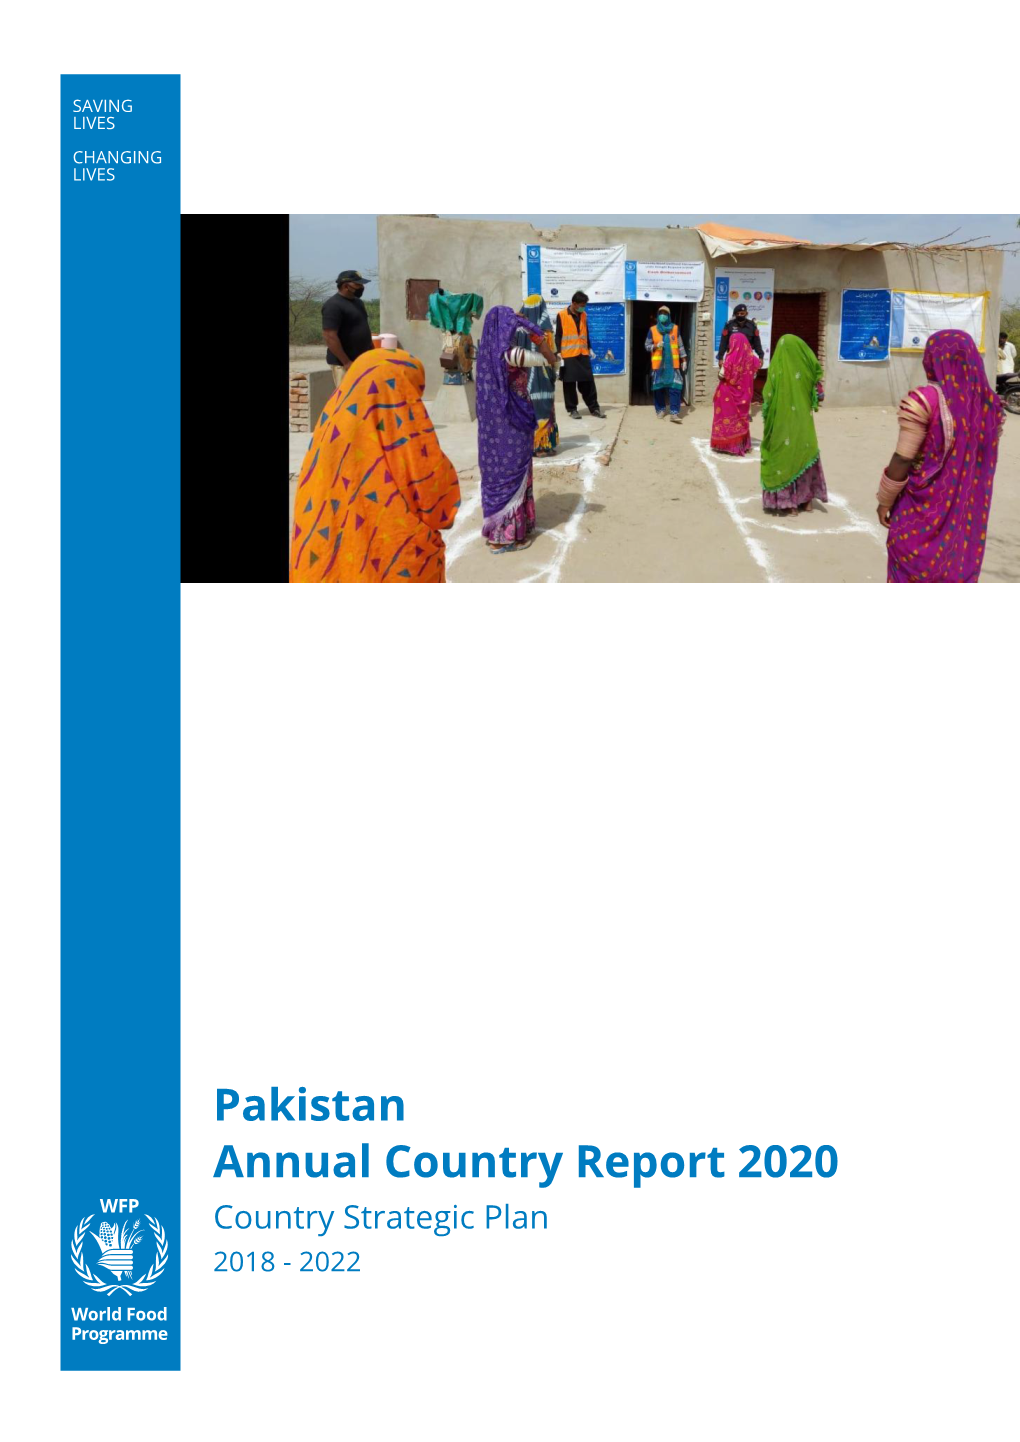 Pakistan Annual Country Report 2020 Country Strategic Plan 2018 - 2022 Table of Contents